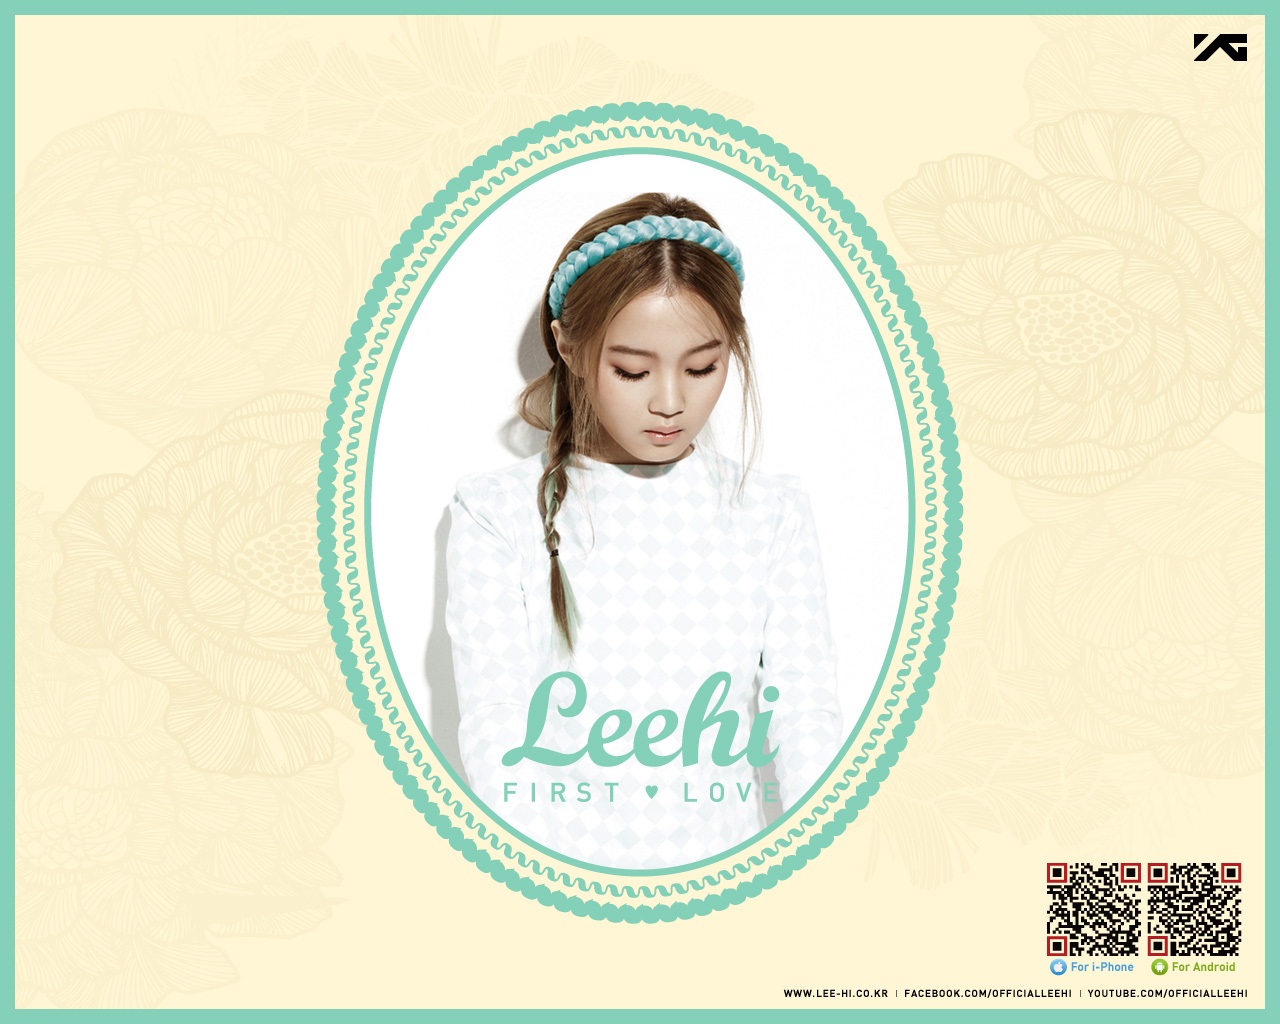 first love wallpaper,text,head,forehead,turquoise,circle